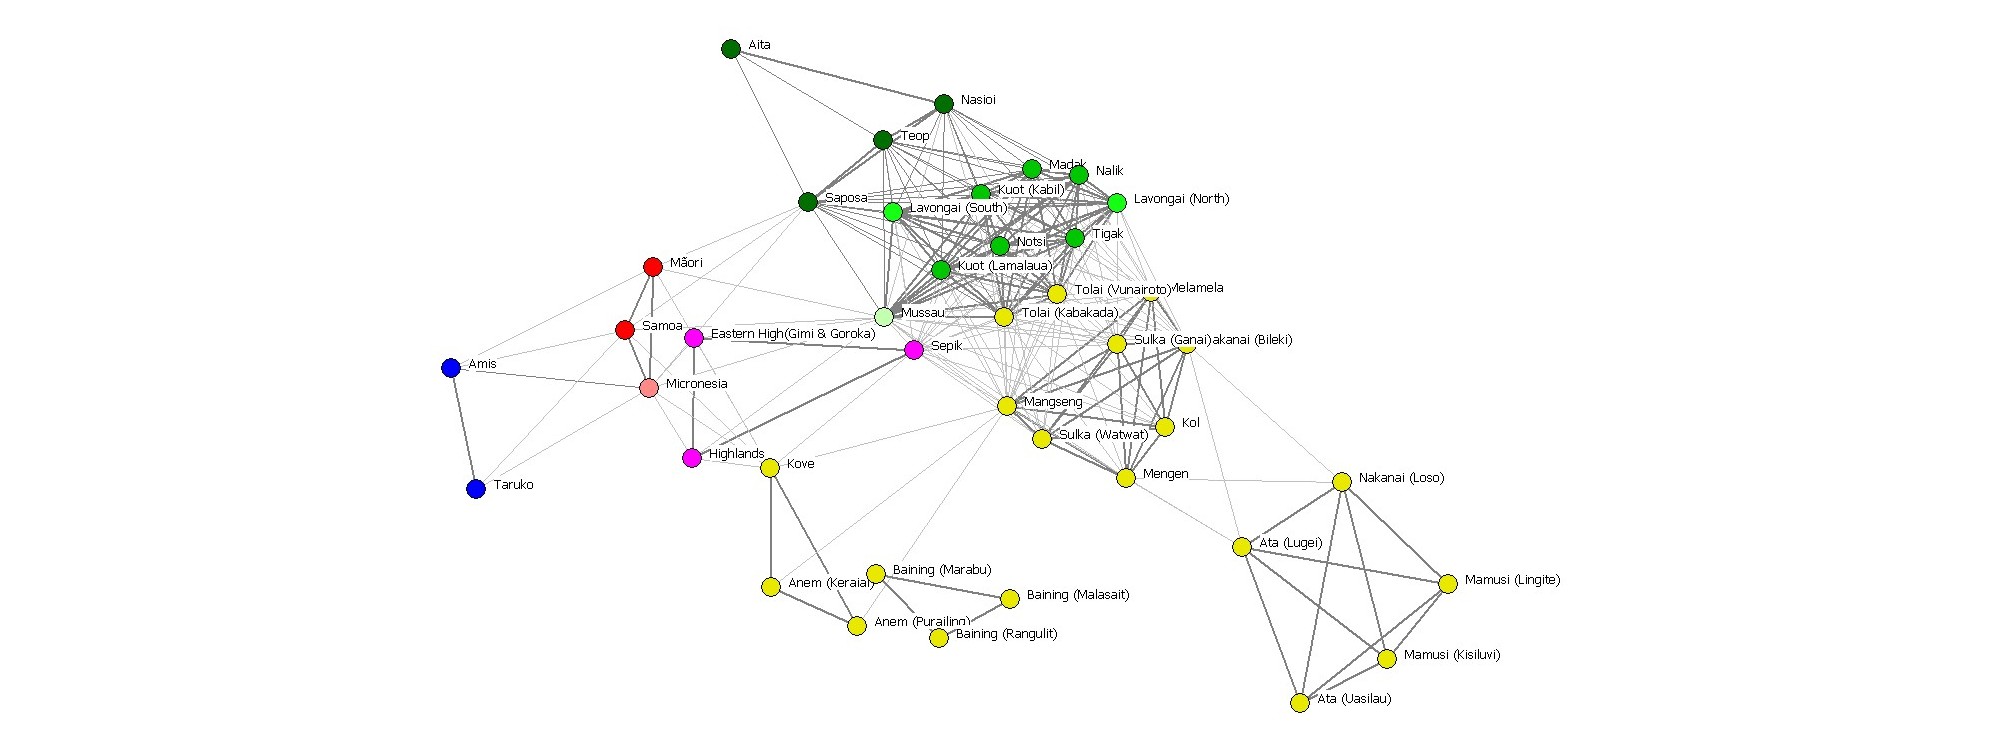 Network mapping of the genetic relationships of islanders in the southwest Pacific (Figure 7 from Terrell, John Edward. 2010. Social network analysis of the genetic structure of Pacific Islanders.  Annals of Human Genetics 74: 211-232)